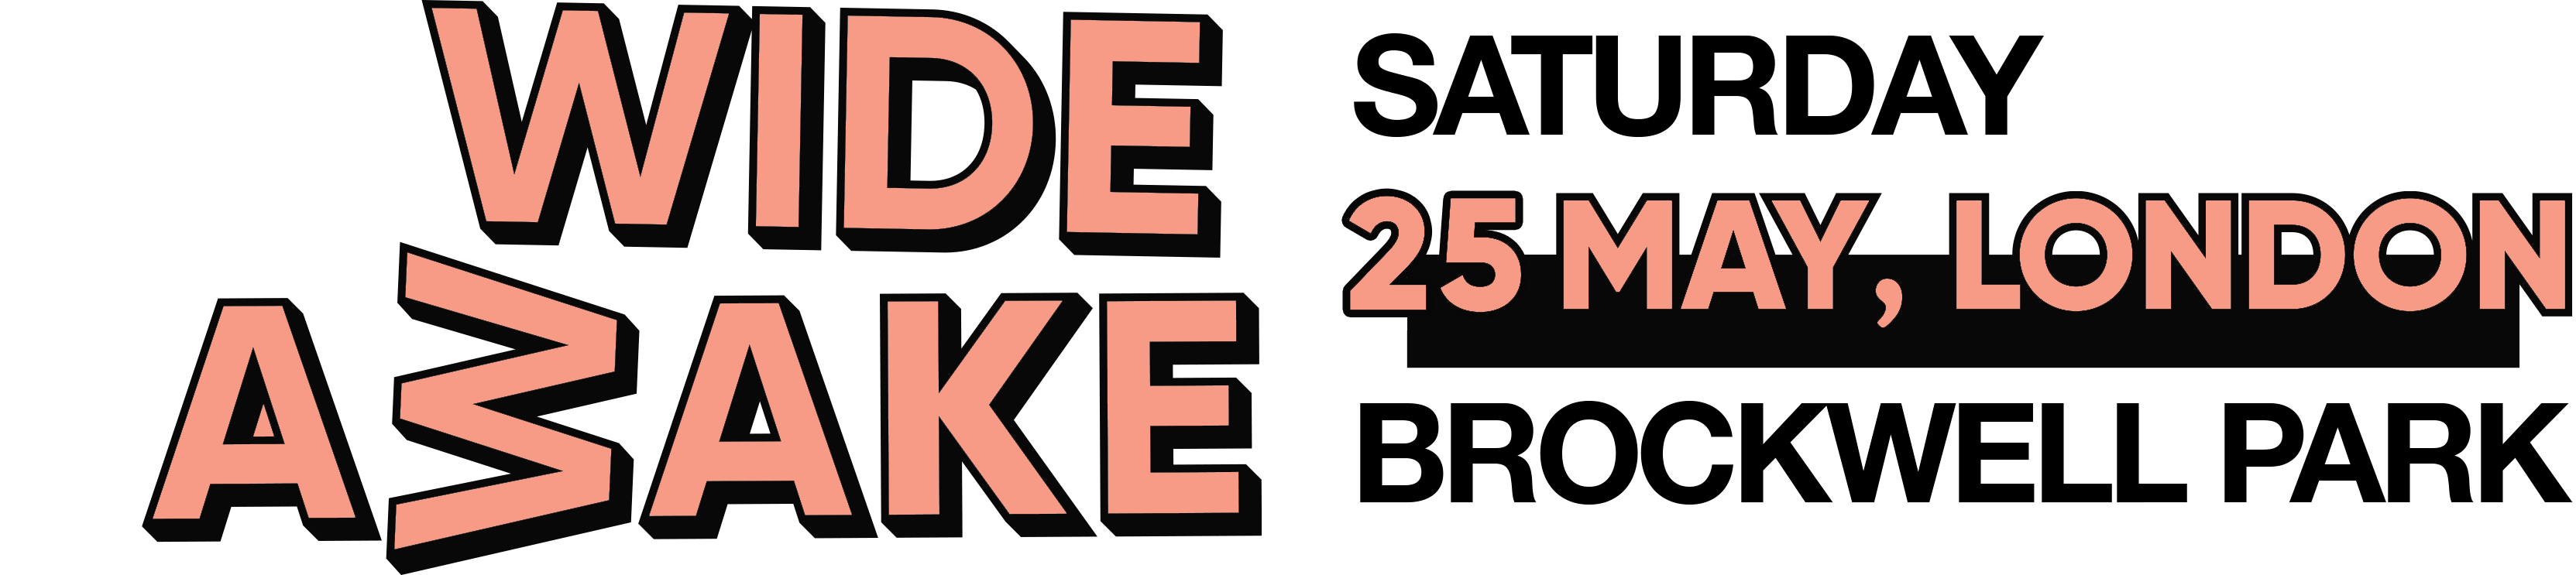 Wide Awake main logo with dates: May 28th 2022, Brockwell Park, London